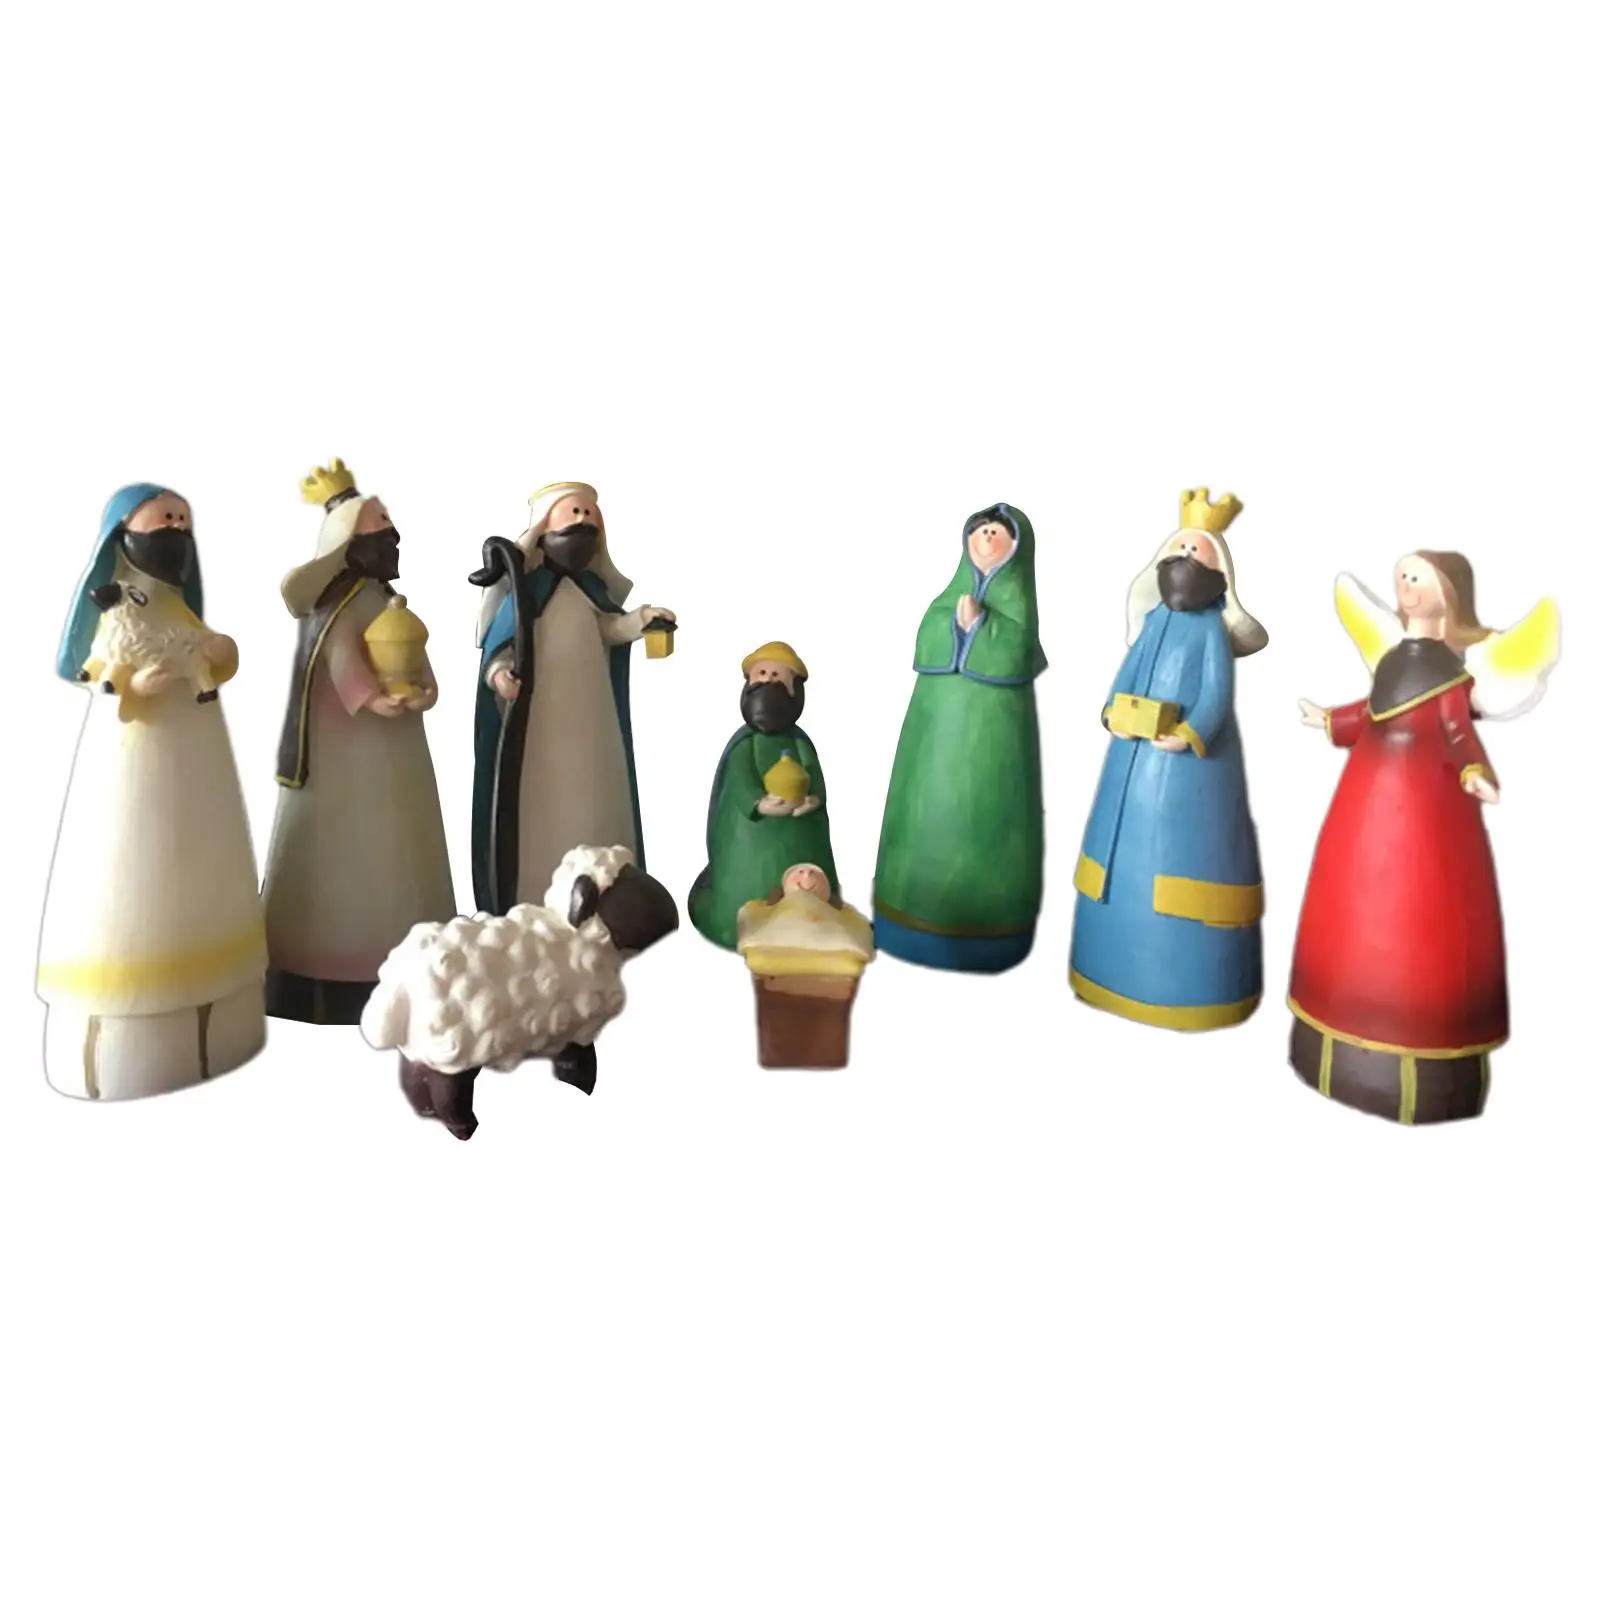 9 Pieces Nativity Scene Manger Figurines Set Christmas Ornament for Tabletop